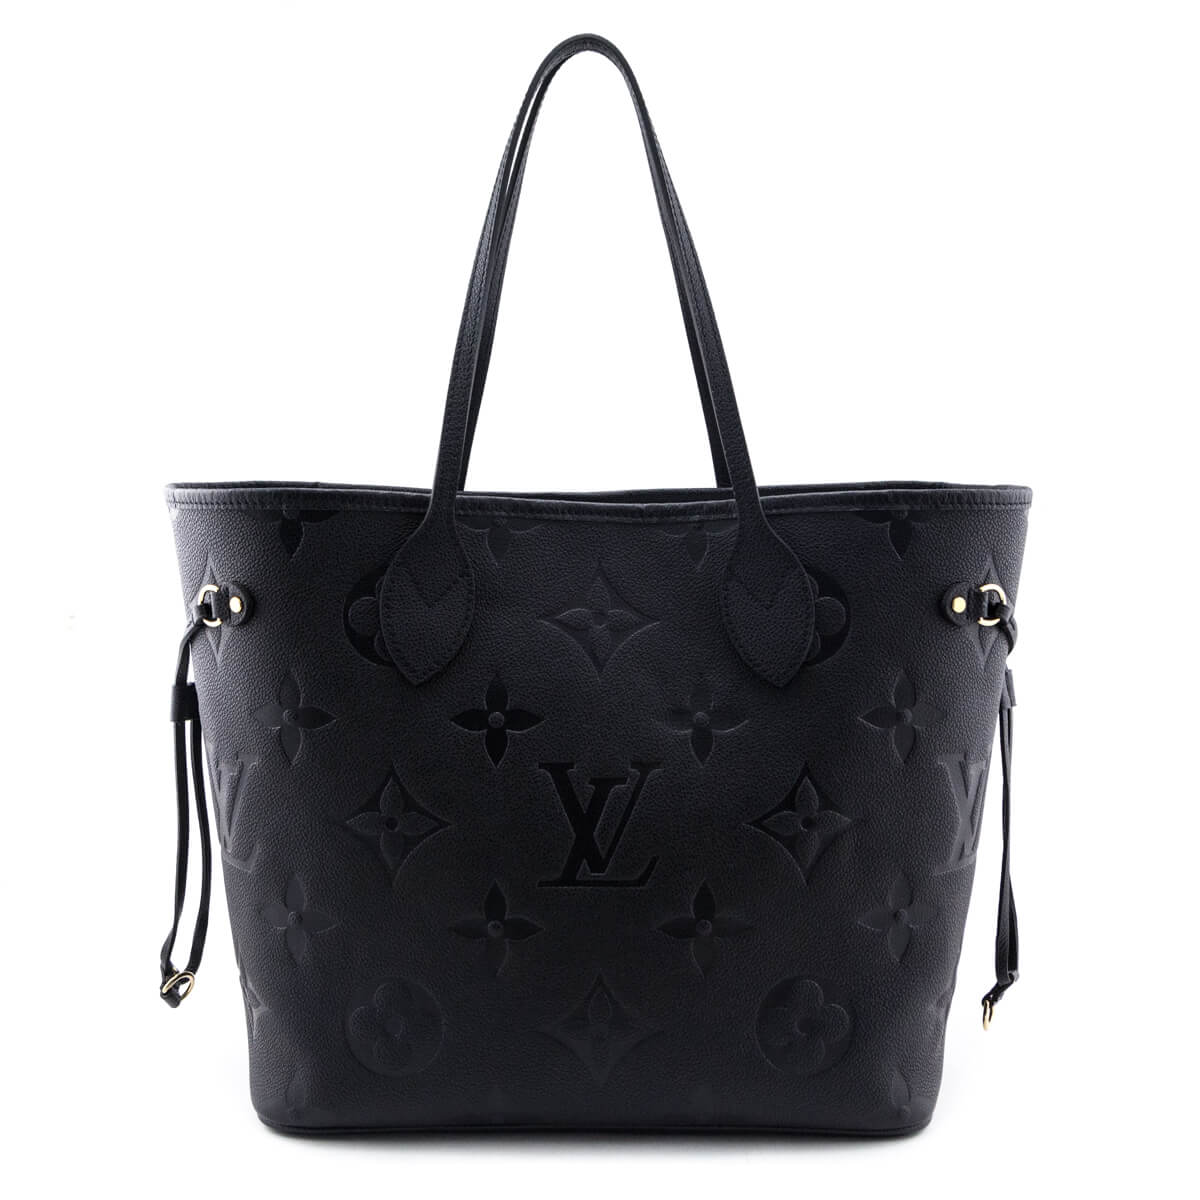 Louis Vuitton Black Giant Empreinte Neverfull MM W/ Pouch - Love that Bag etc - Preowned Authentic Designer Handbags & Preloved Fashions